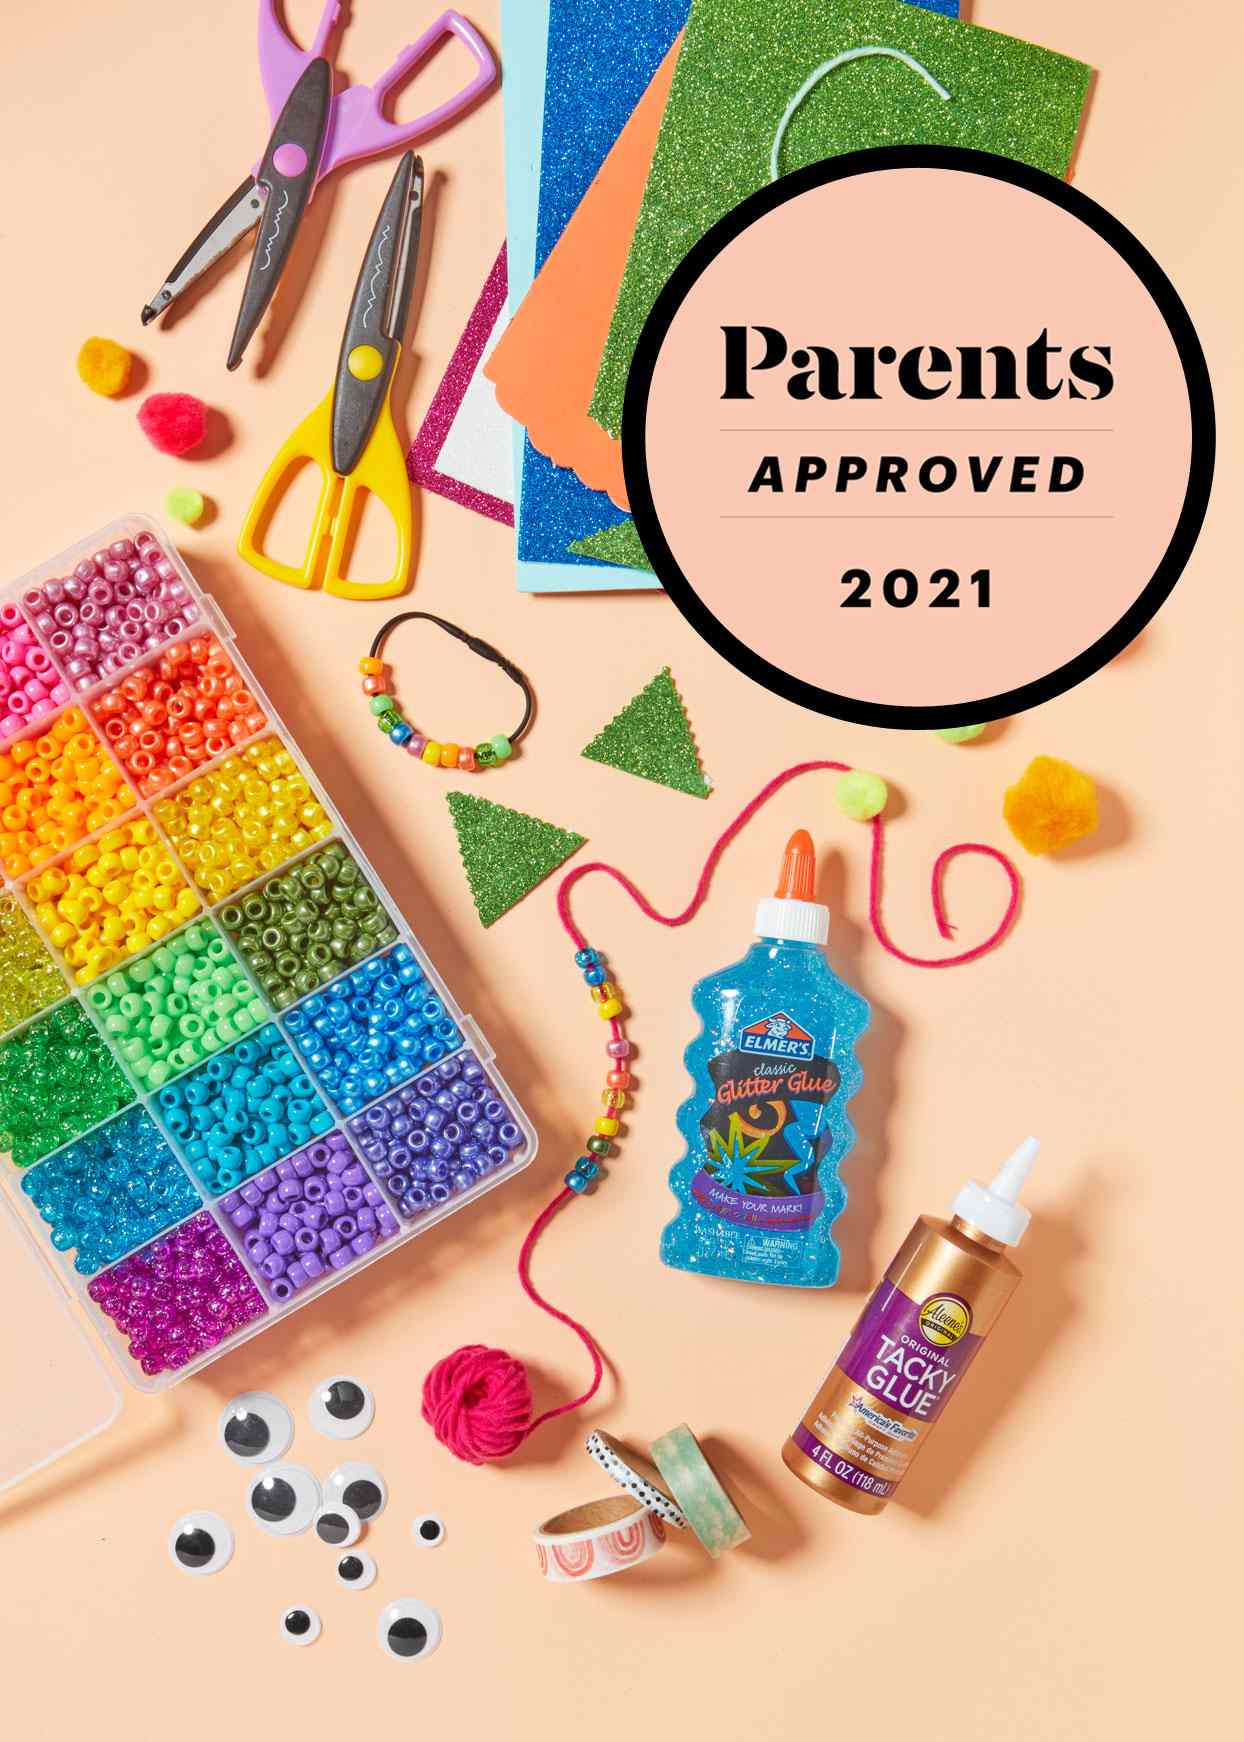 bracelet making supplies and glitter construction paper